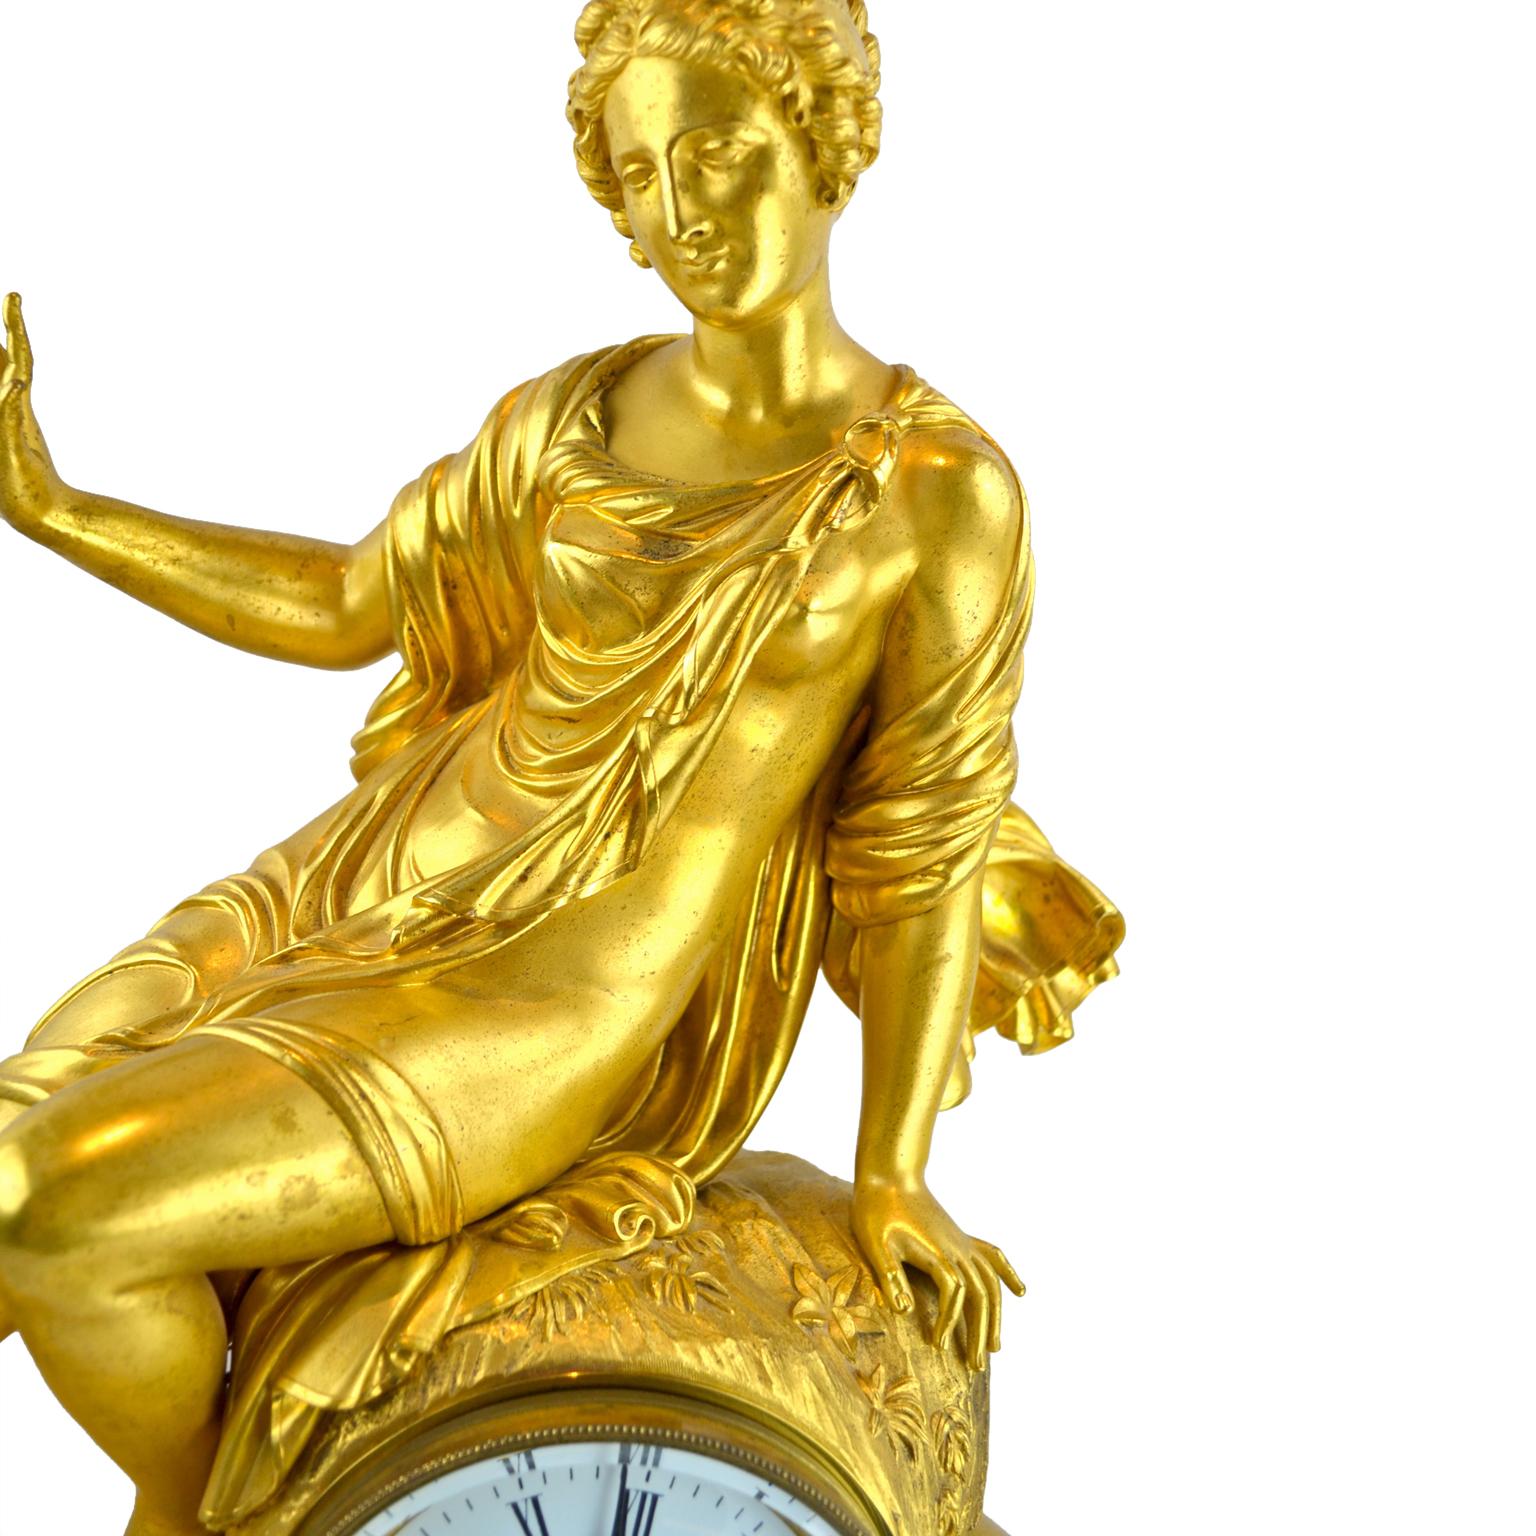 Allegorical French Empire Gilt Bronze Clock Depicting Earth’s Source of Water In Good Condition For Sale In Vancouver, British Columbia